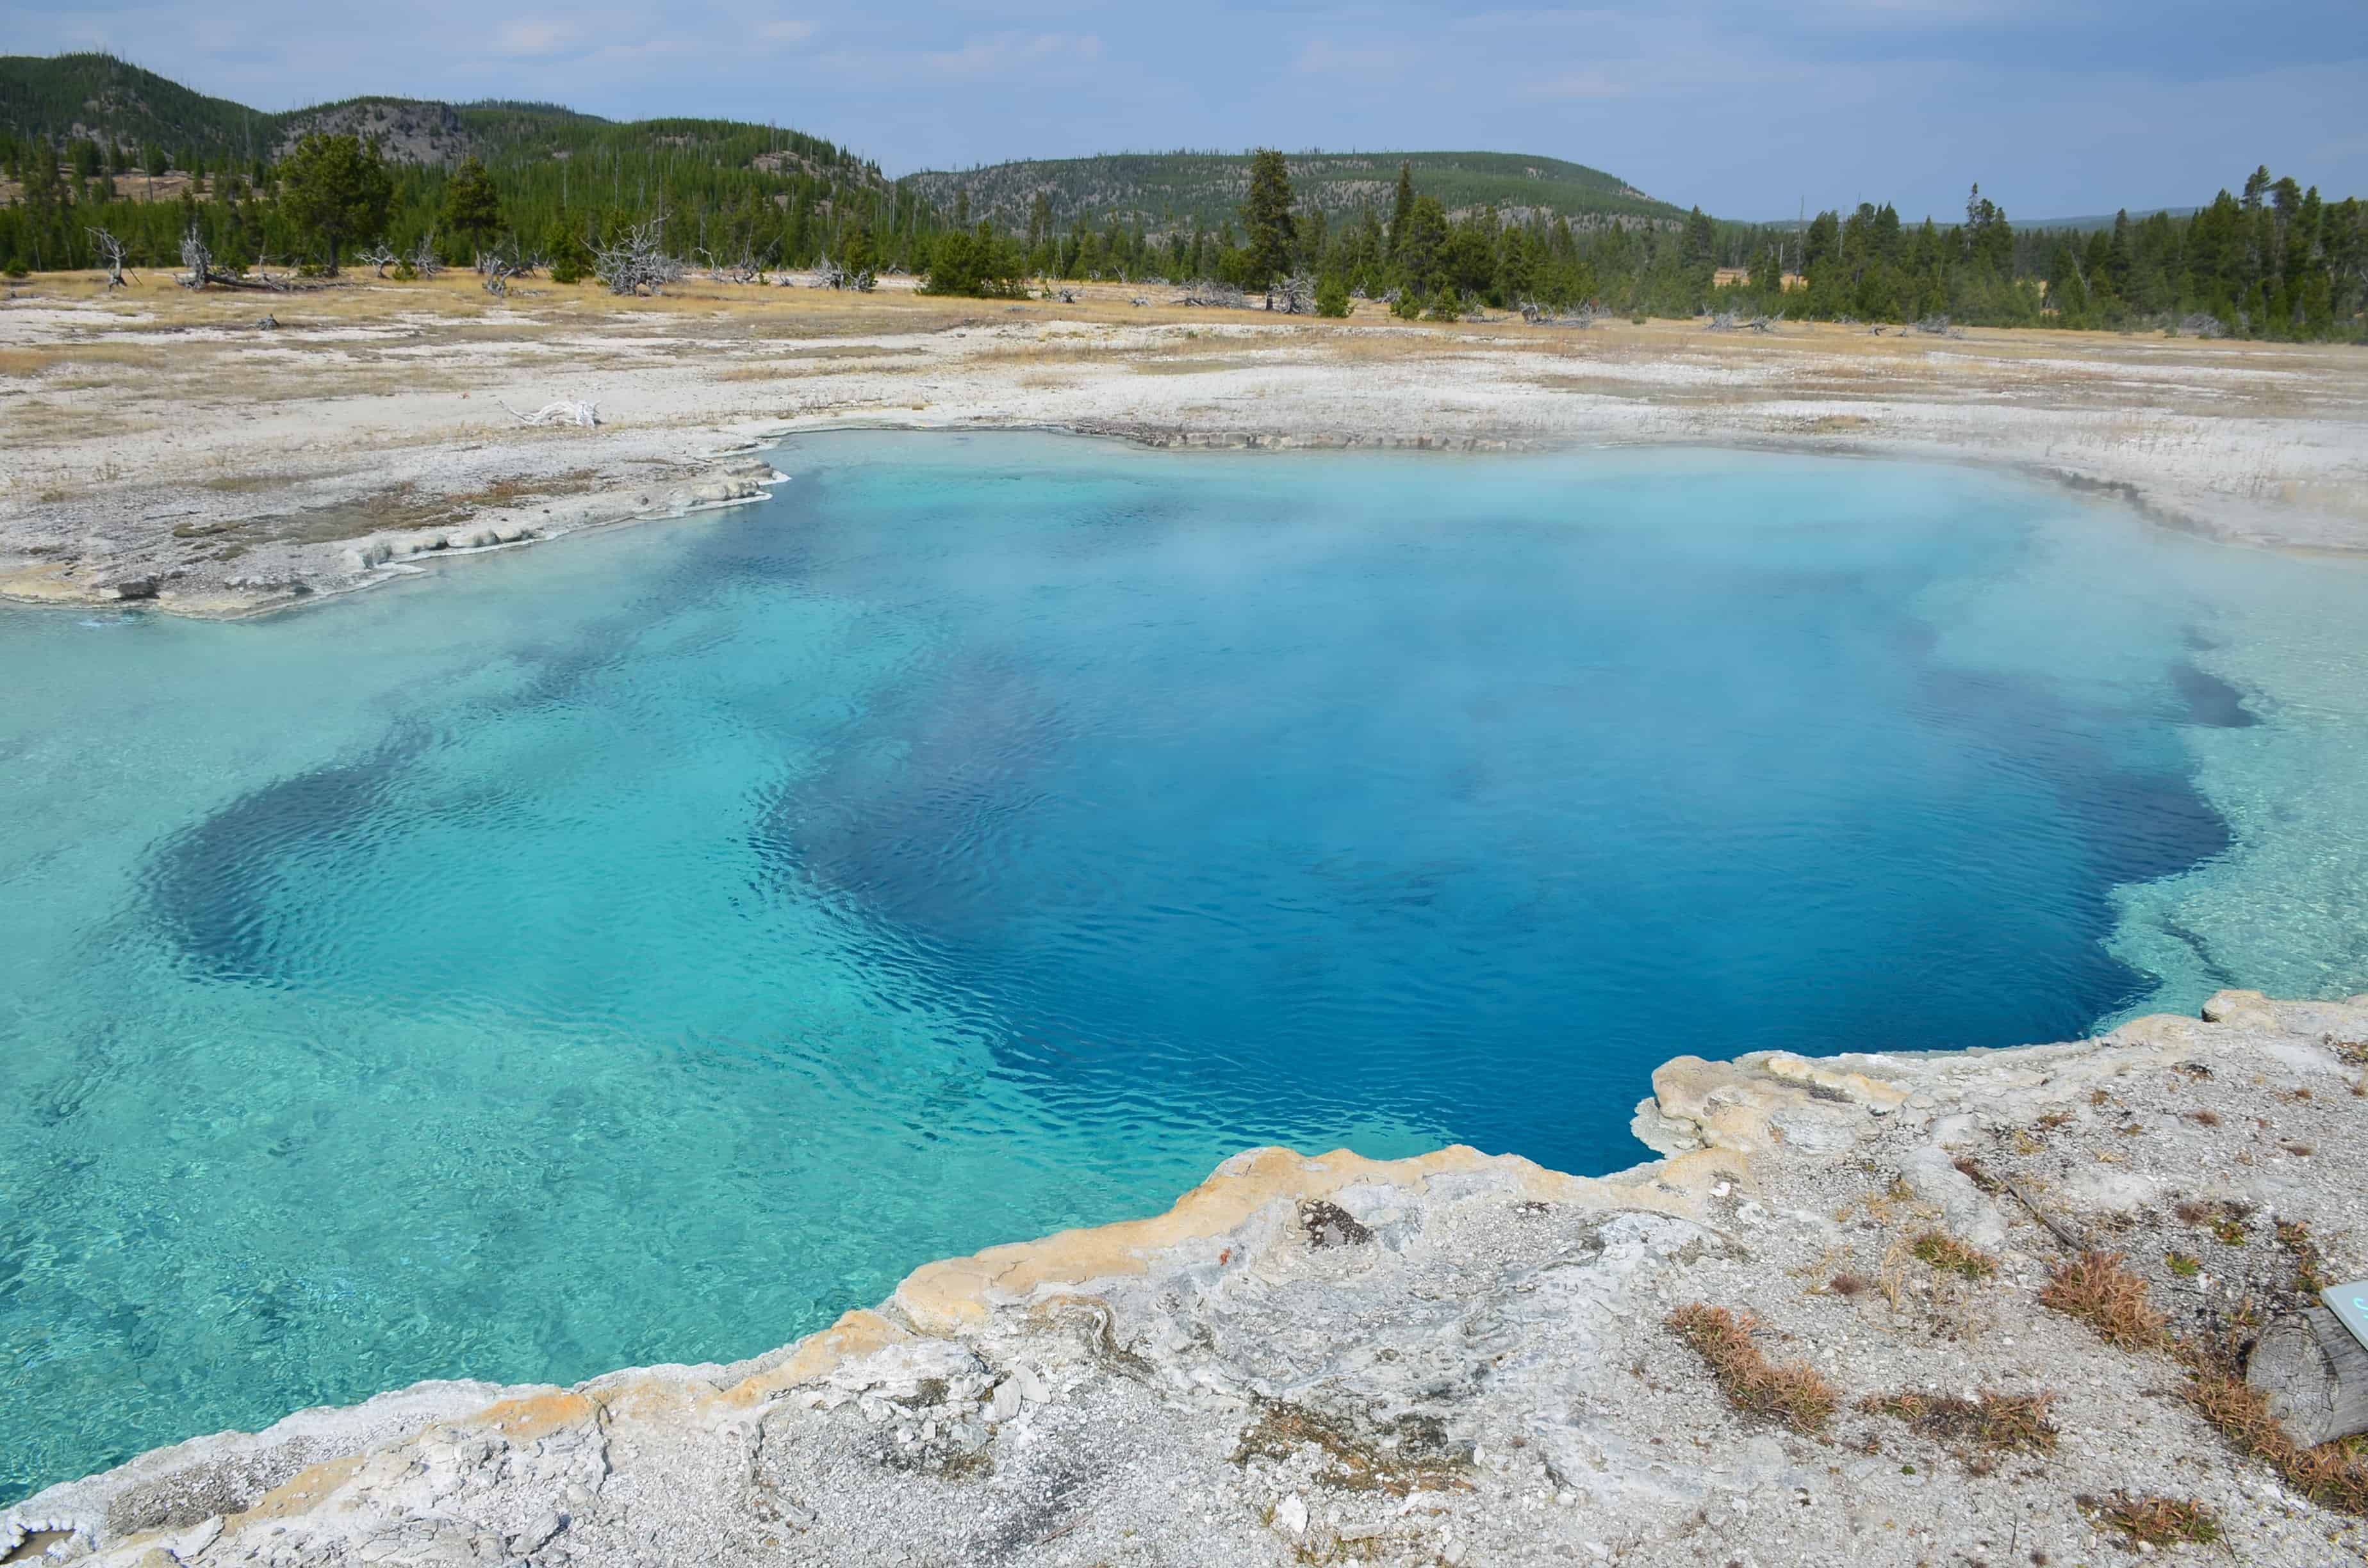 Sapphire Pool at Biscuit Basin at the Upper Geyser Basin at Yellowstone National Park, Wyoming